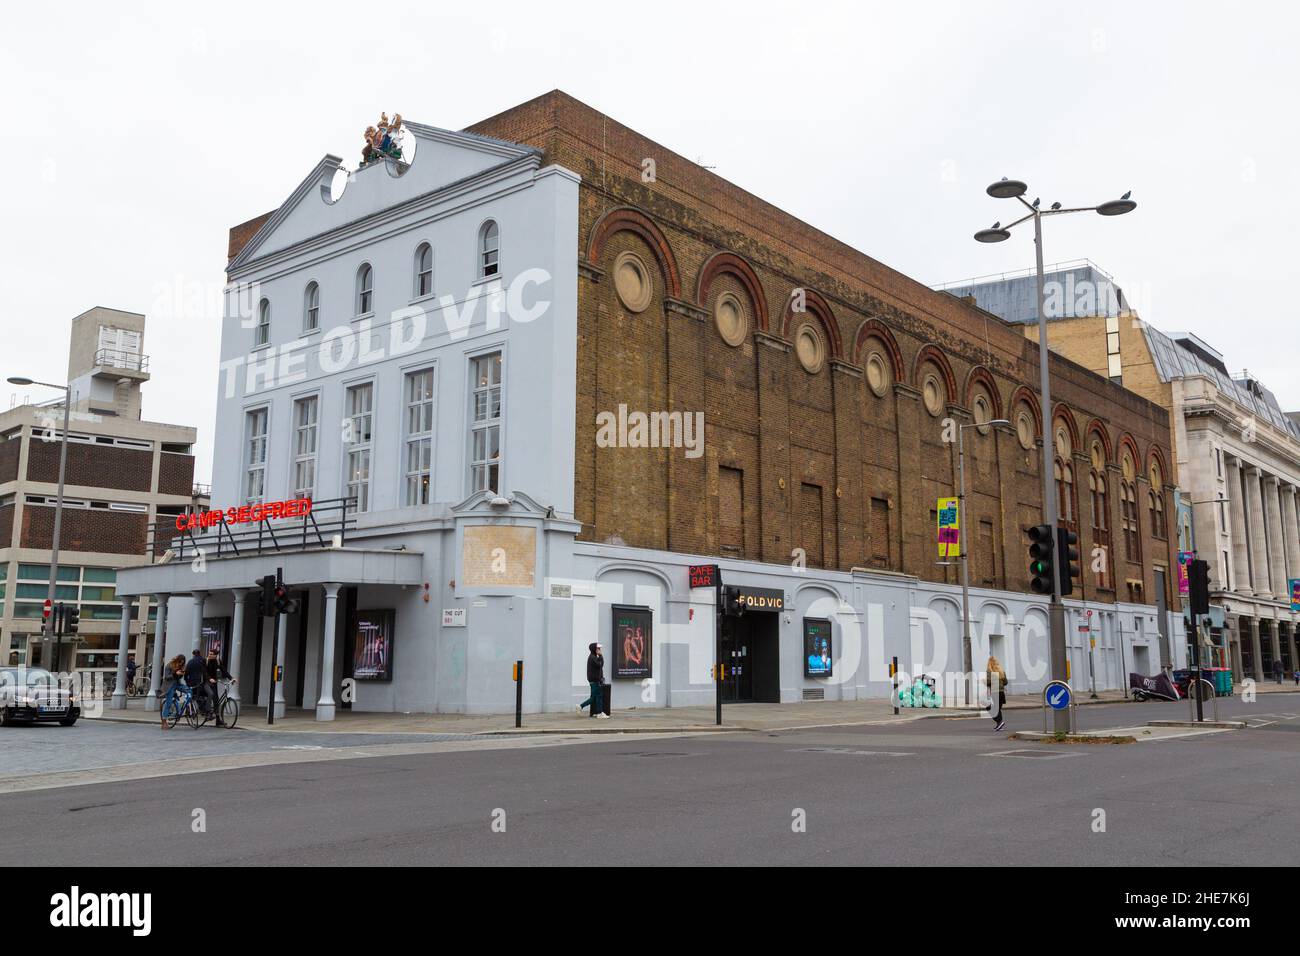 The old vic, london, uk Stock Photo